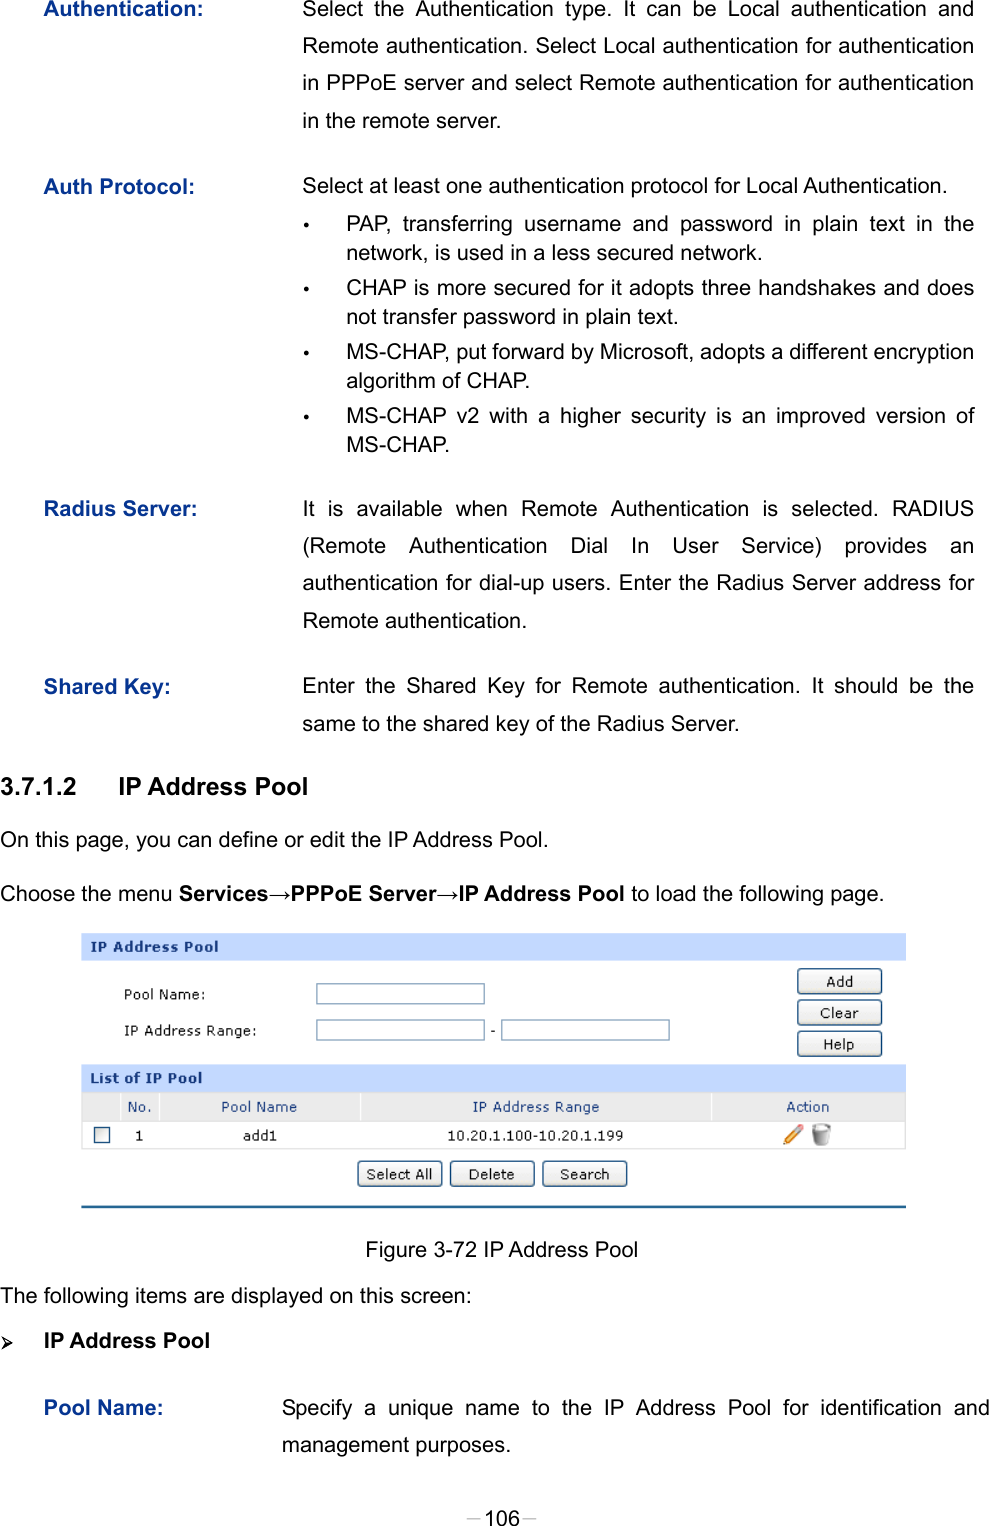  Authentication: Select the Authentication type. It can be Local authentication and Remote authentication. Select Local authentication for authentication in PPPoE server and select Remote authentication for authentication in the remote server.   Auth Protocol: Select at least one authentication protocol for Local Authentication.    PAP, transferring username and password in plain text in the network, is used in a less secured network.    CHAP is more secured for it adopts three handshakes and does not transfer password in plain text.    MS-CHAP, put forward by Microsoft, adopts a different encryption algorithm of CHAP.    MS-CHAP v2 with a higher security is an improved version of MS-CHAP. Radius Server: It is available when Remote Authentication is selected. RADIUS (Remote Authentication Dial In User Service) provides an authentication for dial-up users. Enter the Radius Server address for Remote authentication.   Shared Key: Enter the Shared Key for Remote authentication. It should be the same to the shared key of the Radius Server. 3.7.1.2 IP Address Pool On this page, you can define or edit the IP Address Pool. Choose the menu Services→PPPoE Server→IP Address Pool to load the following page.  Figure 3-72 IP Address Pool The following items are displayed on this screen:  IP Address Pool Pool Name: Specify a unique name to the IP Address Pool for identification and management purposes.   -106- 